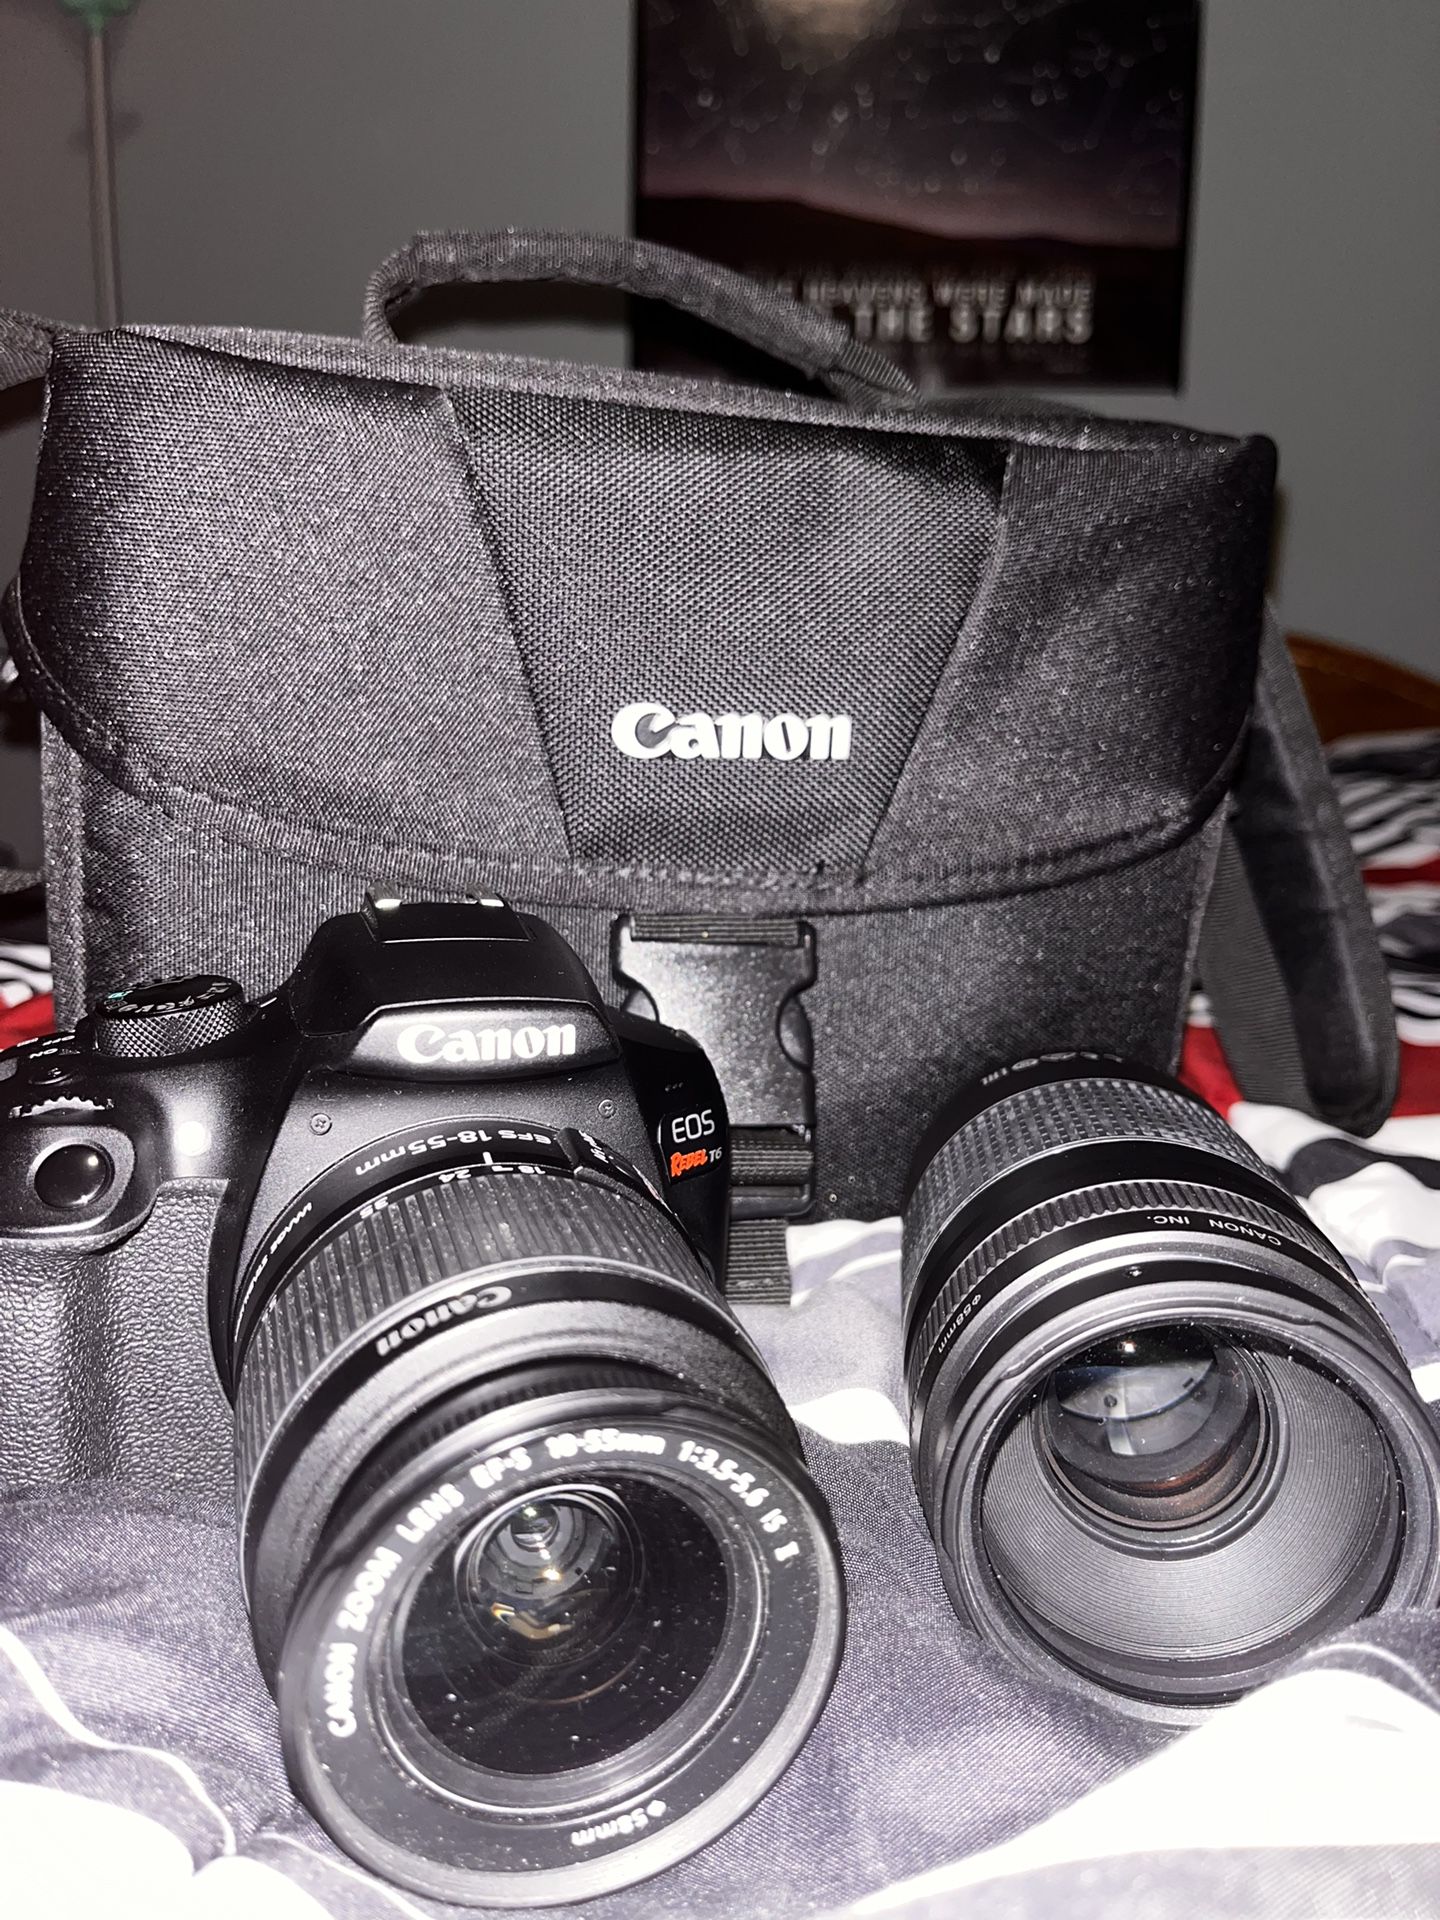 Canon EOS Rebel T6 Camera with 18-55 mm lens and 75-300 mm lens and more